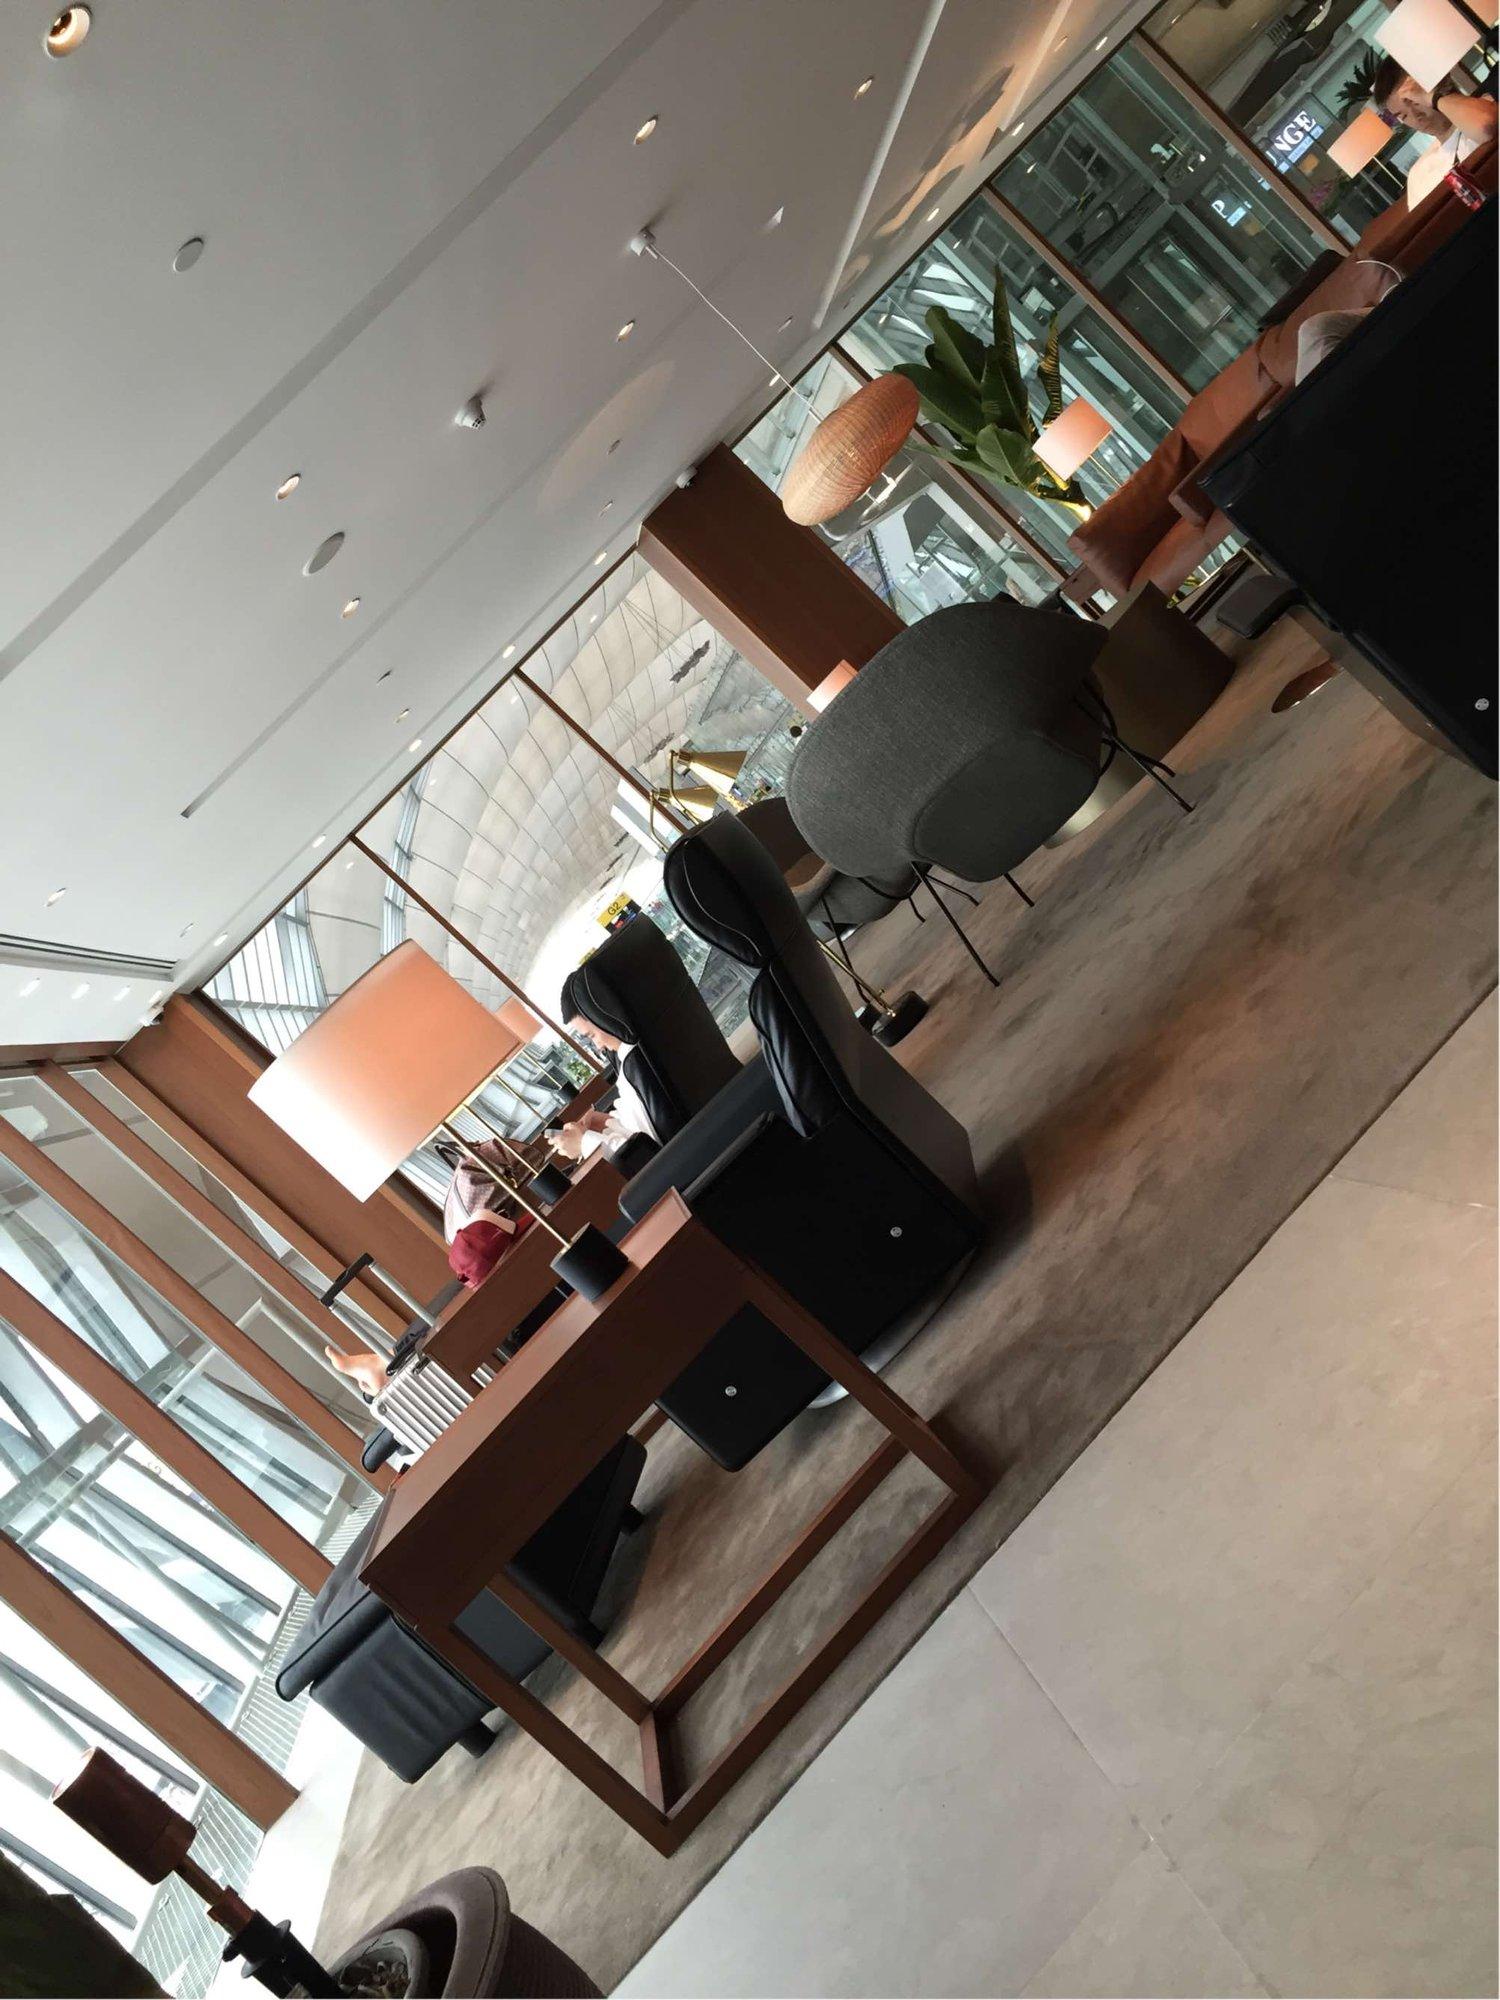 Cathay Pacific First and Business Class Lounge image 2 of 69